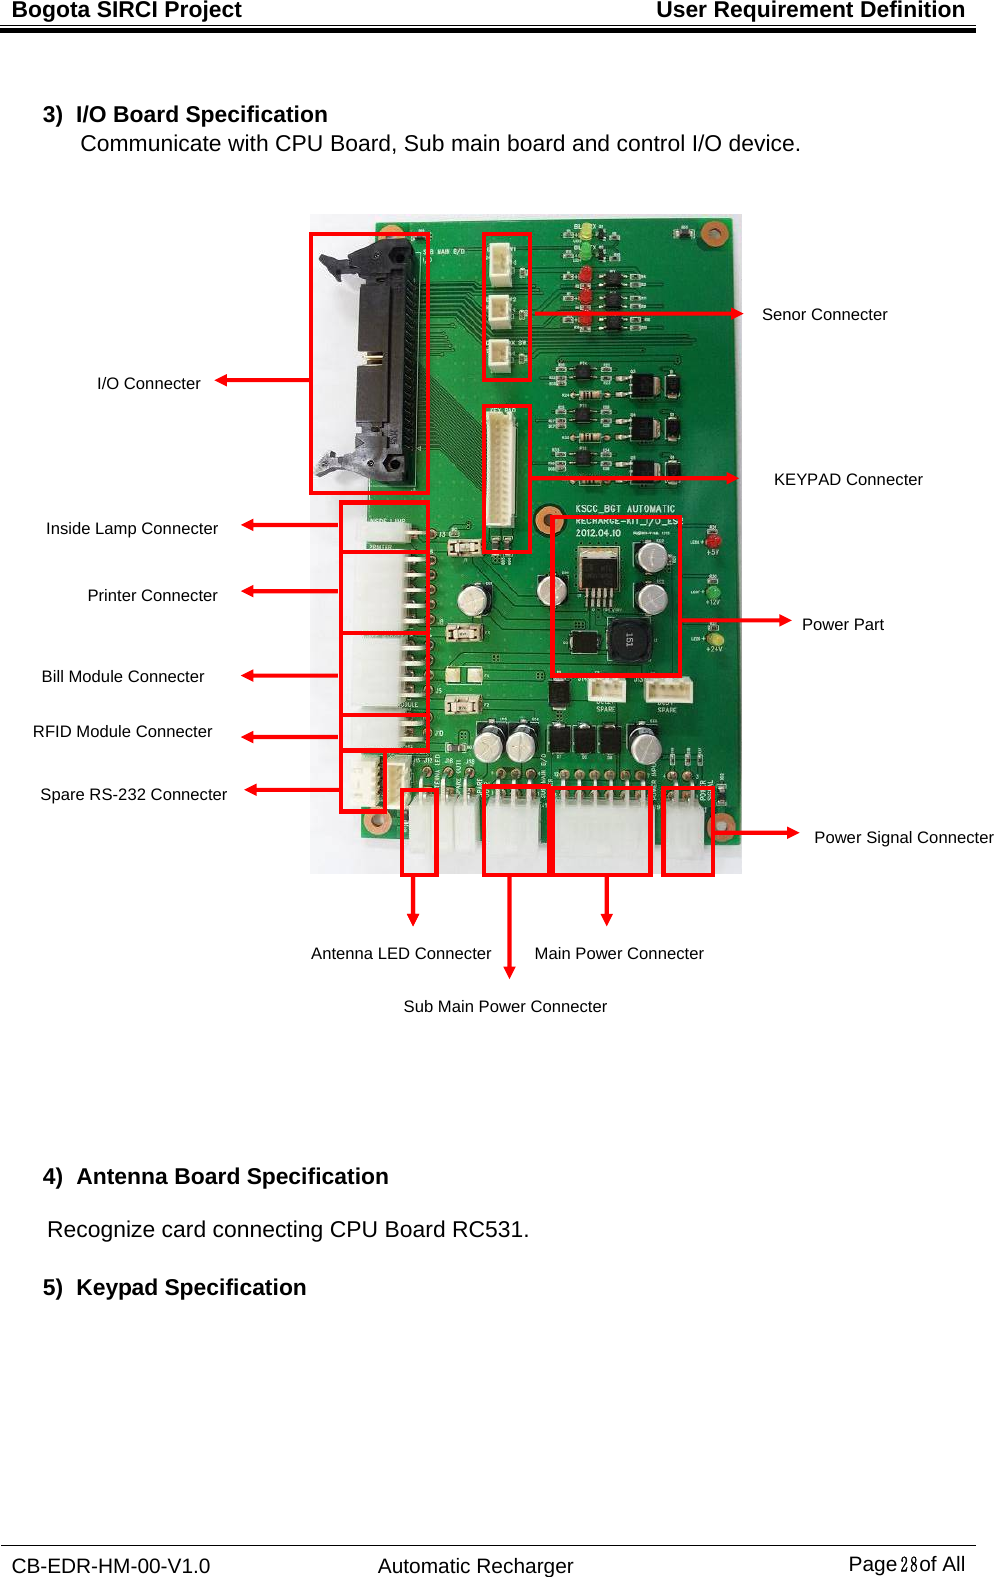 Bogota SIRCI Project  User Requirement Definition CB-EDR-HM-00-V1.0 Automatic Recharger Page２８ of All  3)  I/O Board Specification Communicate with CPU Board, Sub main board and control I/O device.                4)  Antenna Board Specification  Recognize card connecting CPU Board RC531.  5) Keypad Specification  I/O ConnecterKEYPAD ConnecterSenor ConnecterPower Part Inside Lamp Connecter Printer Connecter Bill Module Connecter RFID Module Connecter Spare RS-232 Connecter Antenna LED Connecter Sub Main Power Connecter Main Power Connecter Power Signal Connecter 